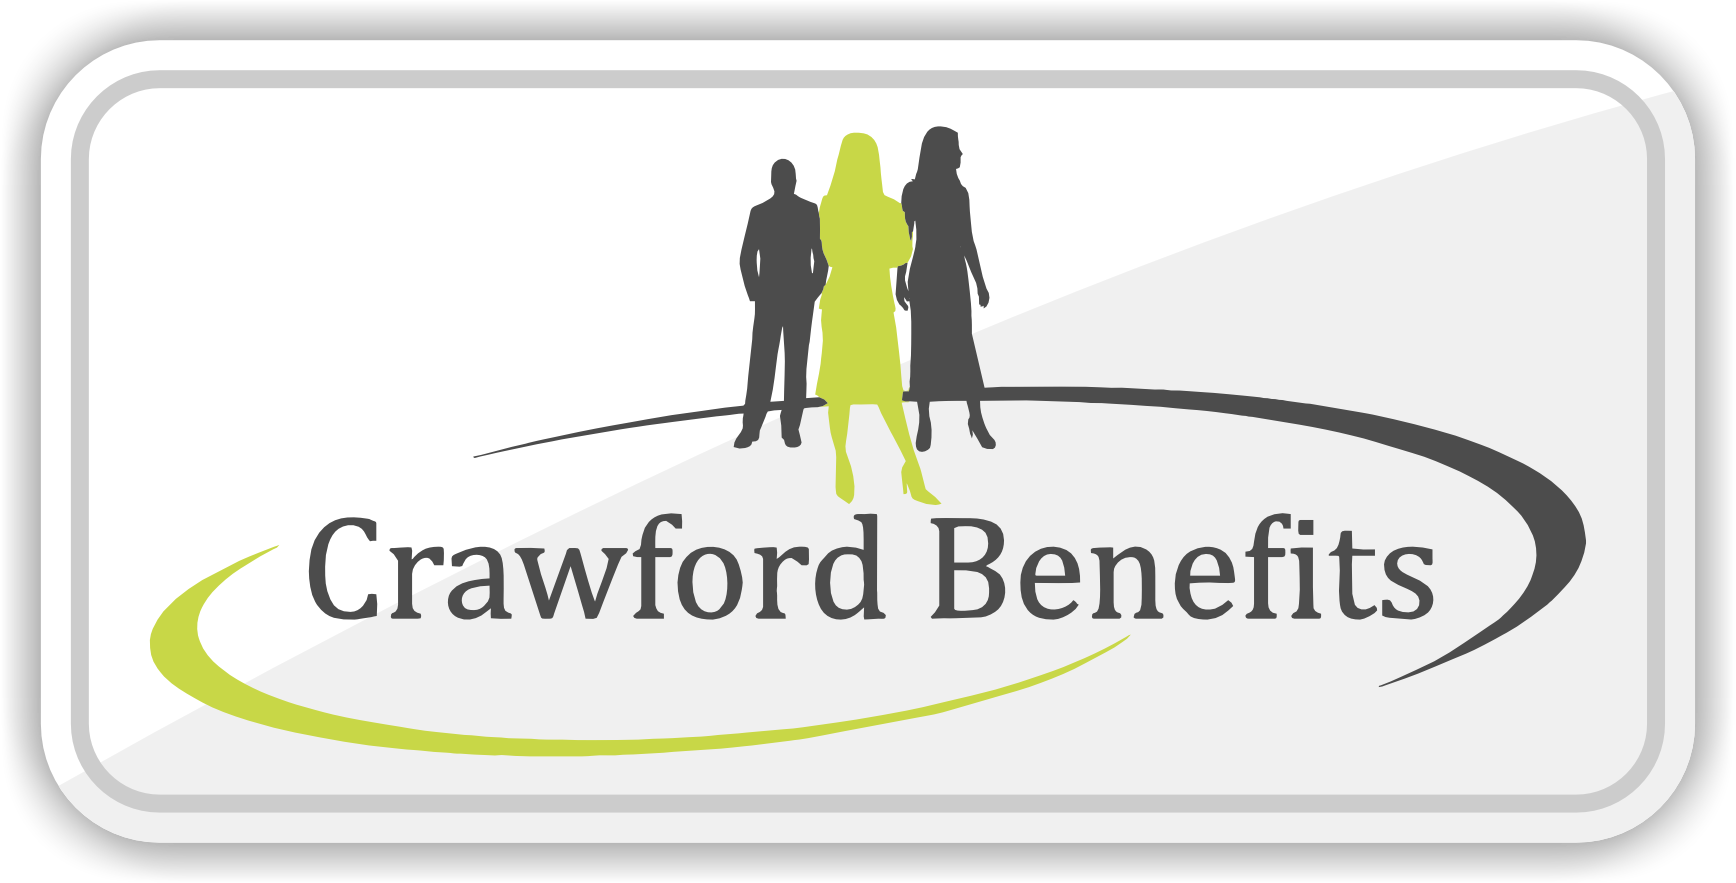 The logo for crawford benefits shows a man and a woman standing next to each other